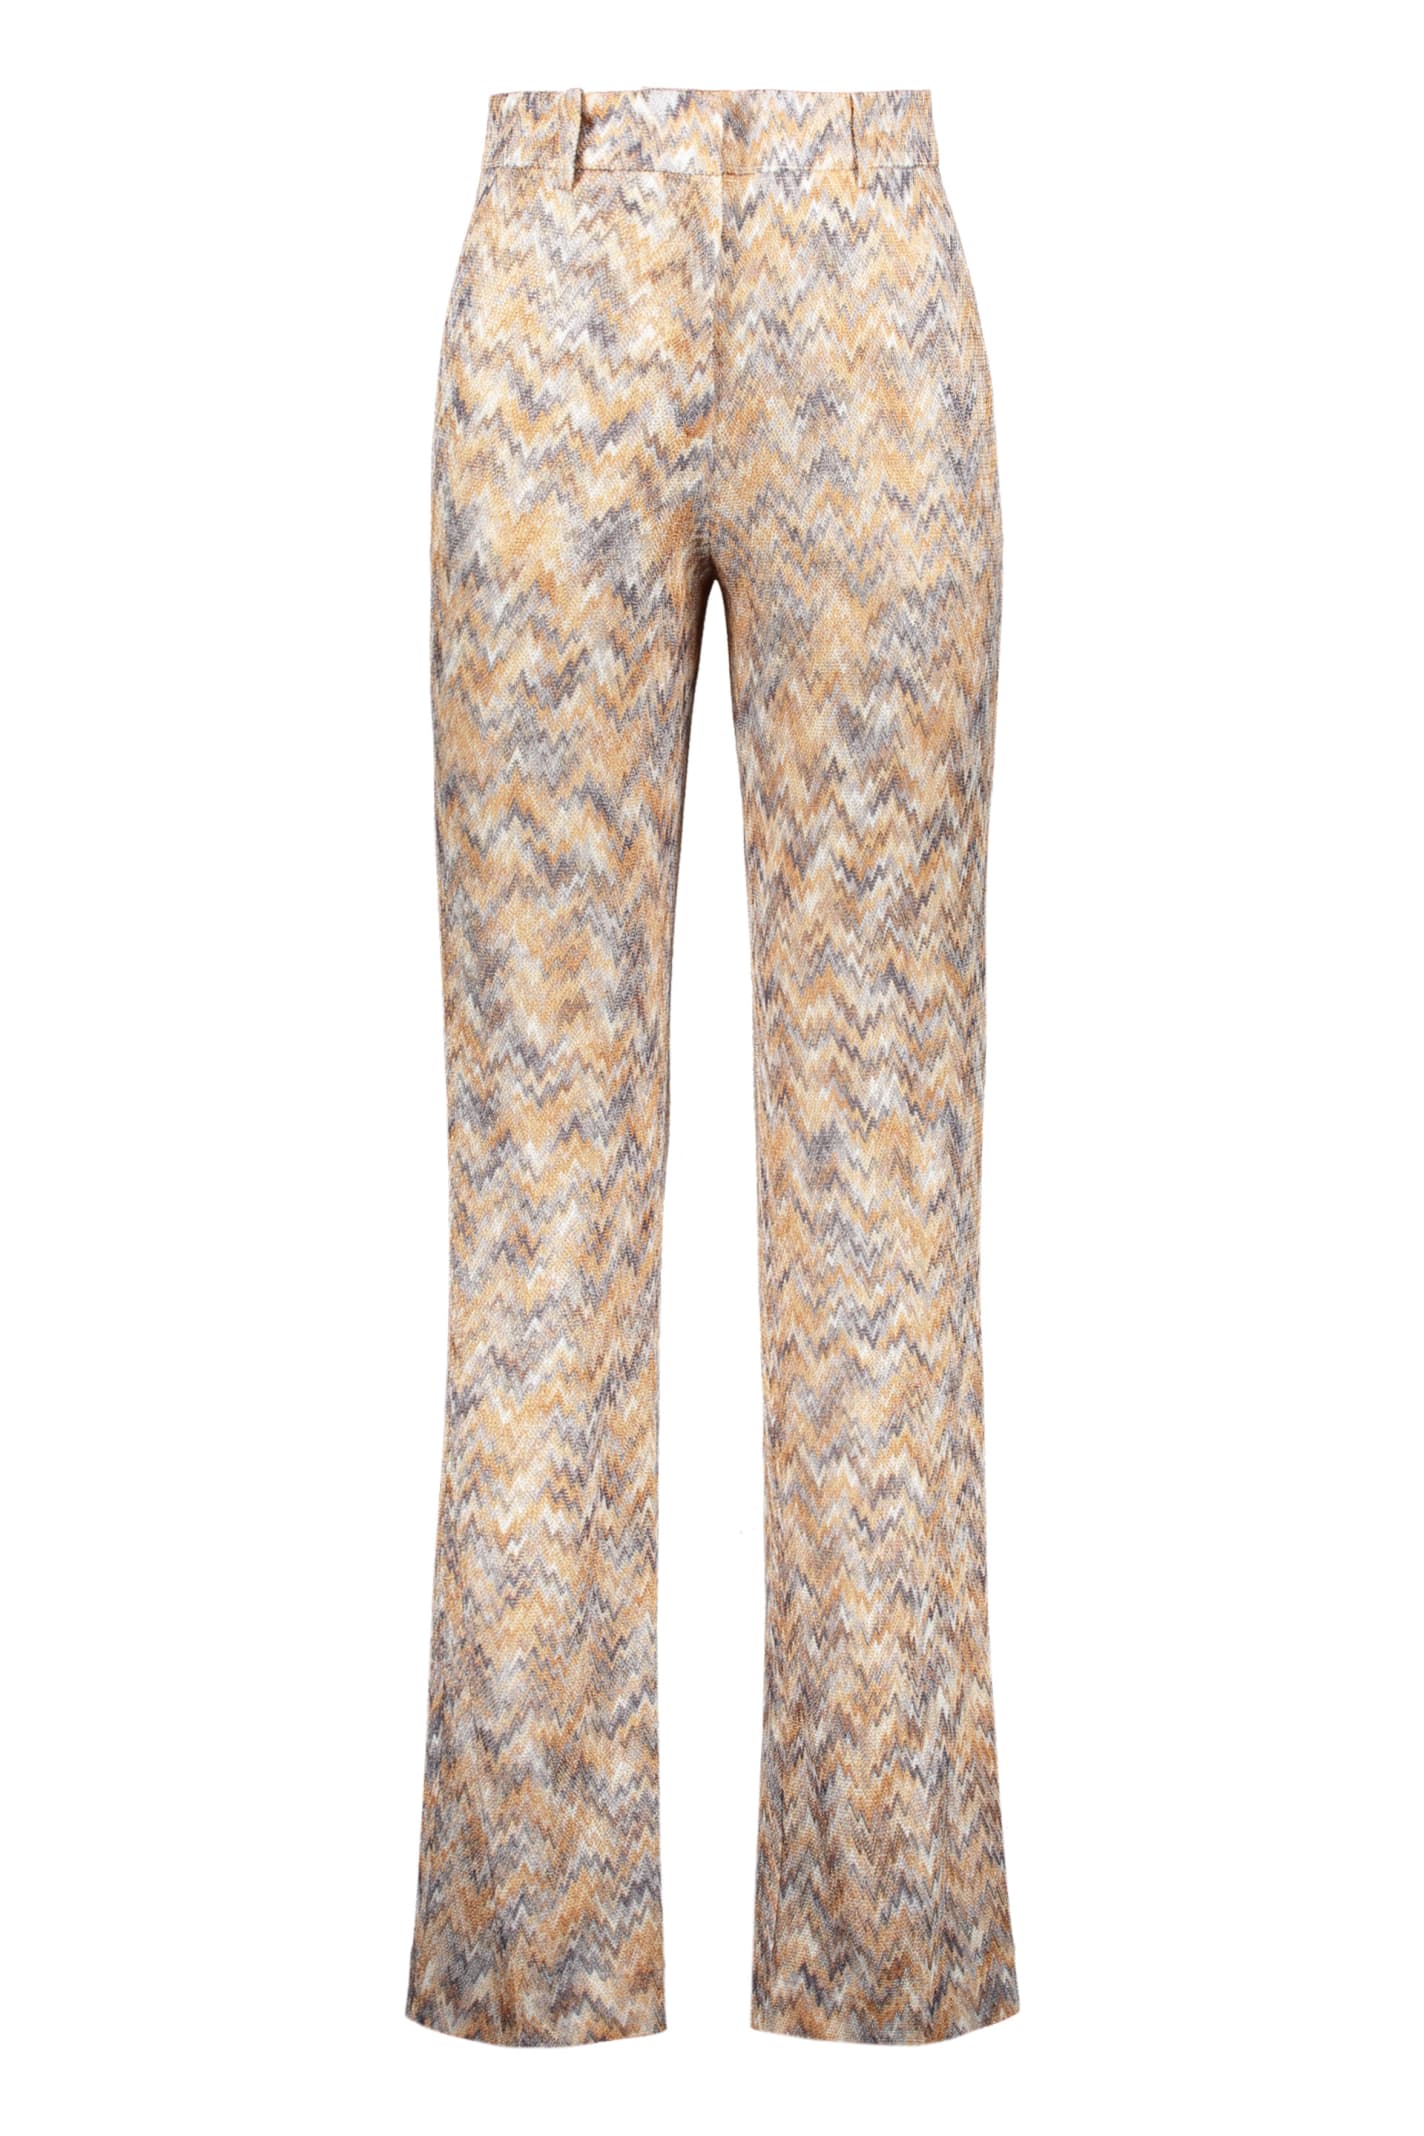 Missoni Chevron Knitted Palazzo Trousers In Multicolor